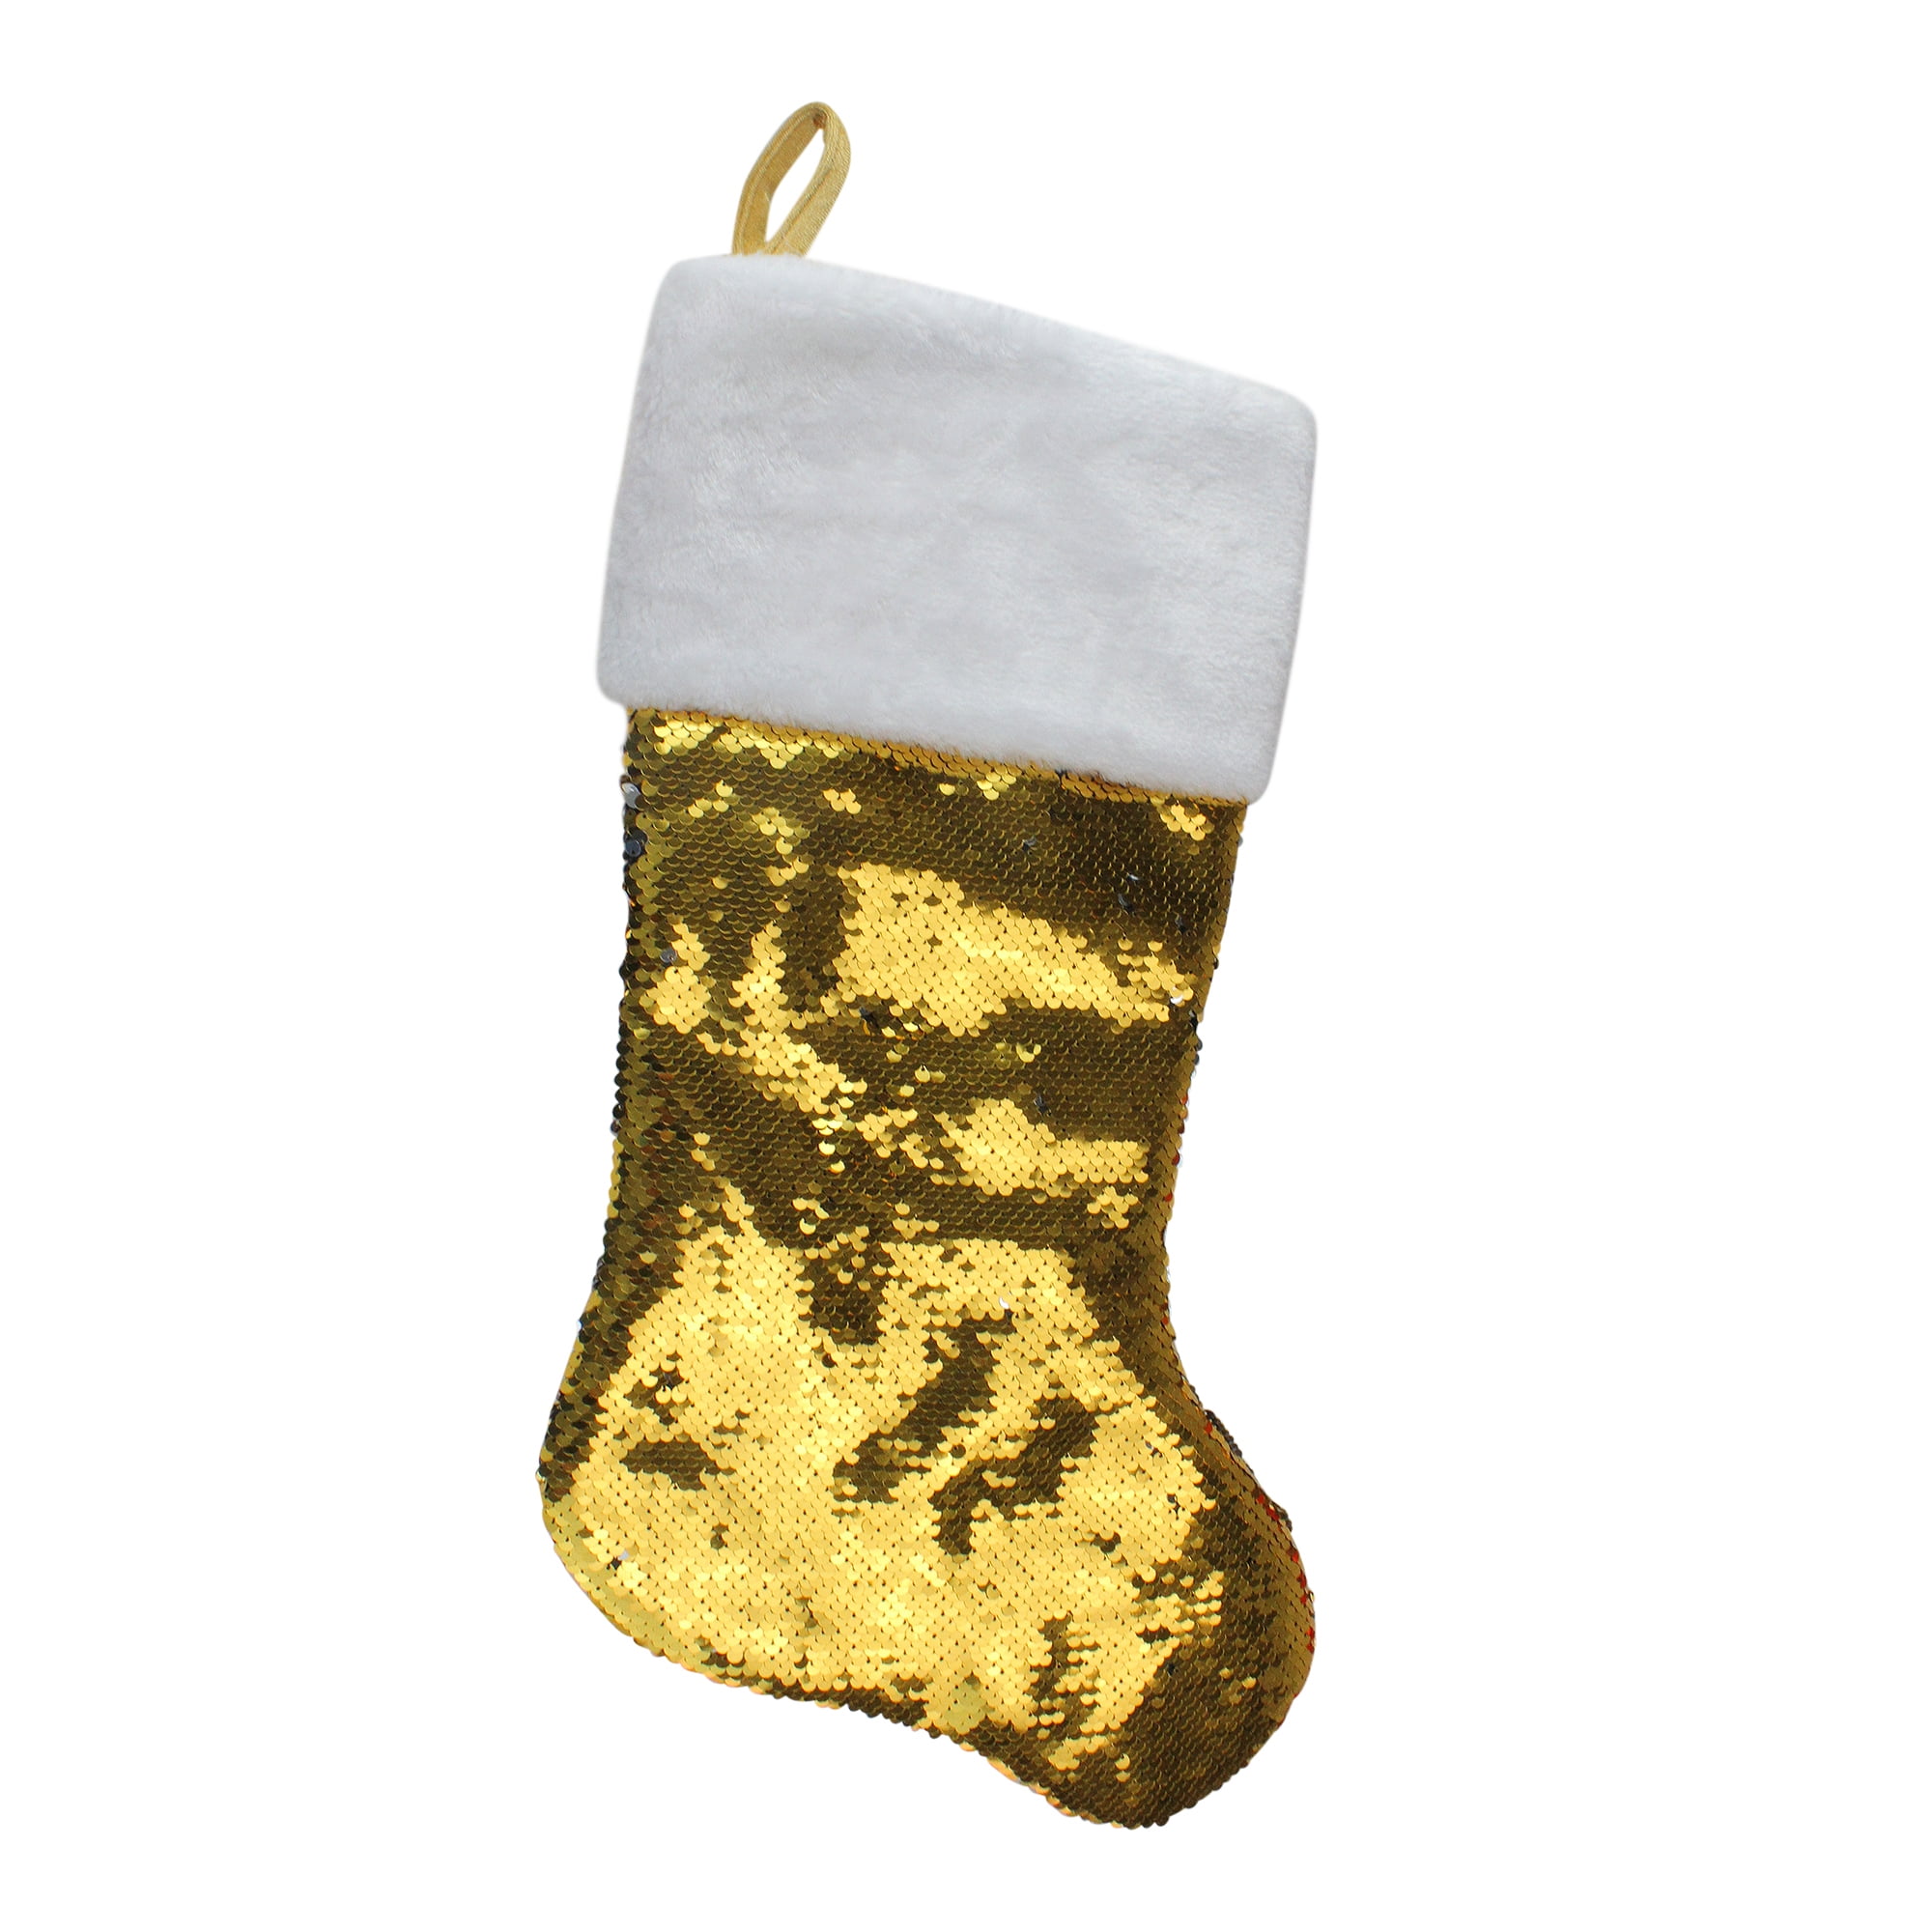 Silver Pink Gold Sequin Holiday/Christmas Stockings Gold Gold Trim about 14" 